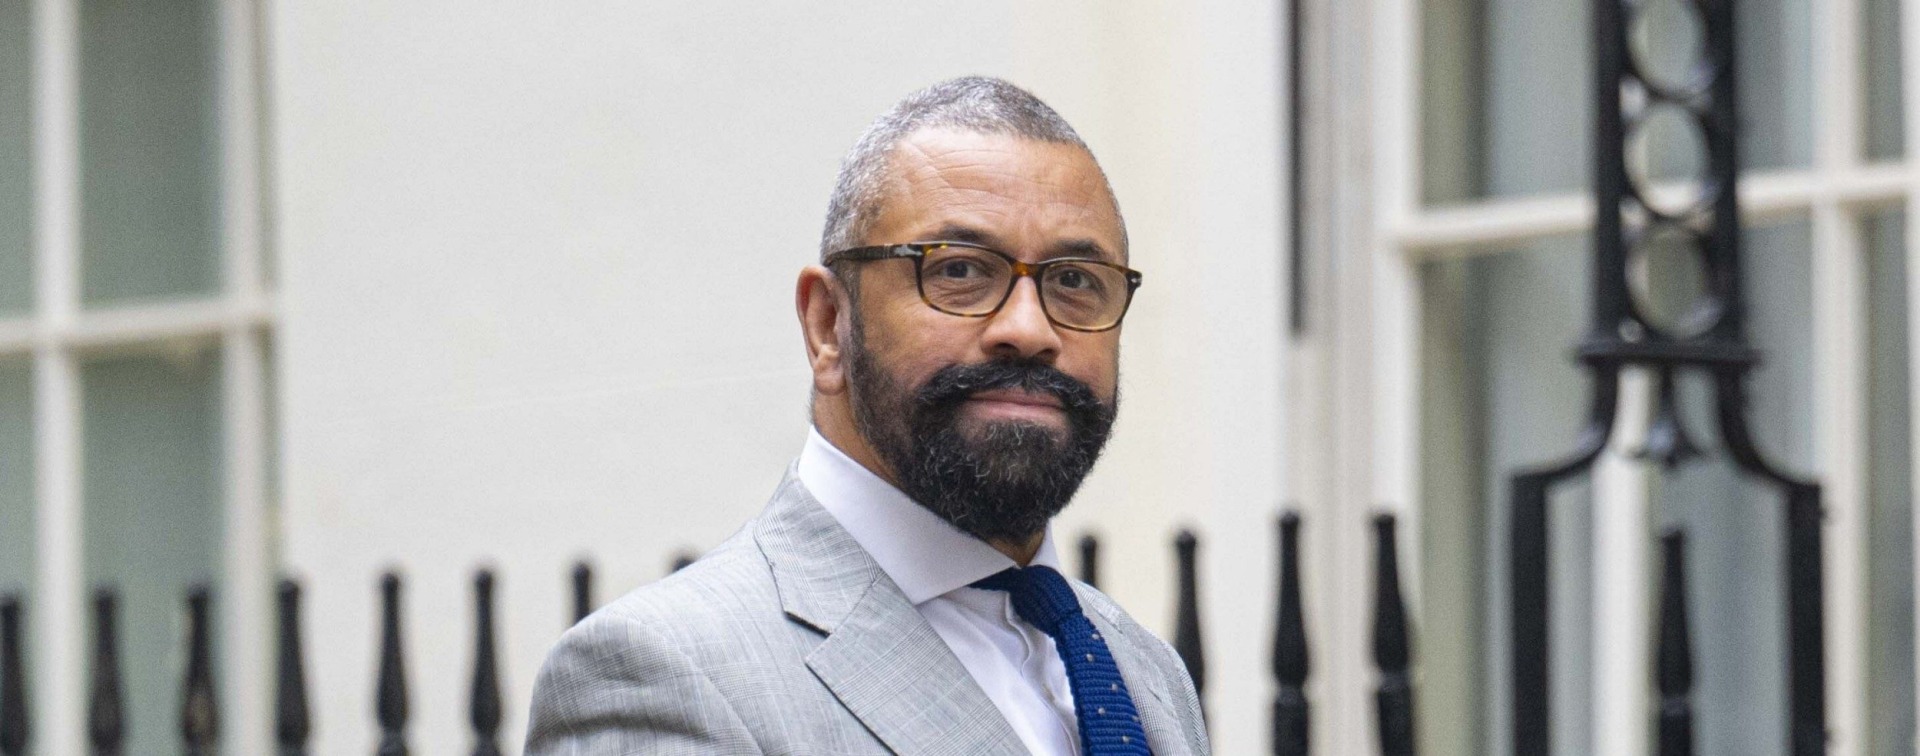 James Cleverly is the New Home Secretary